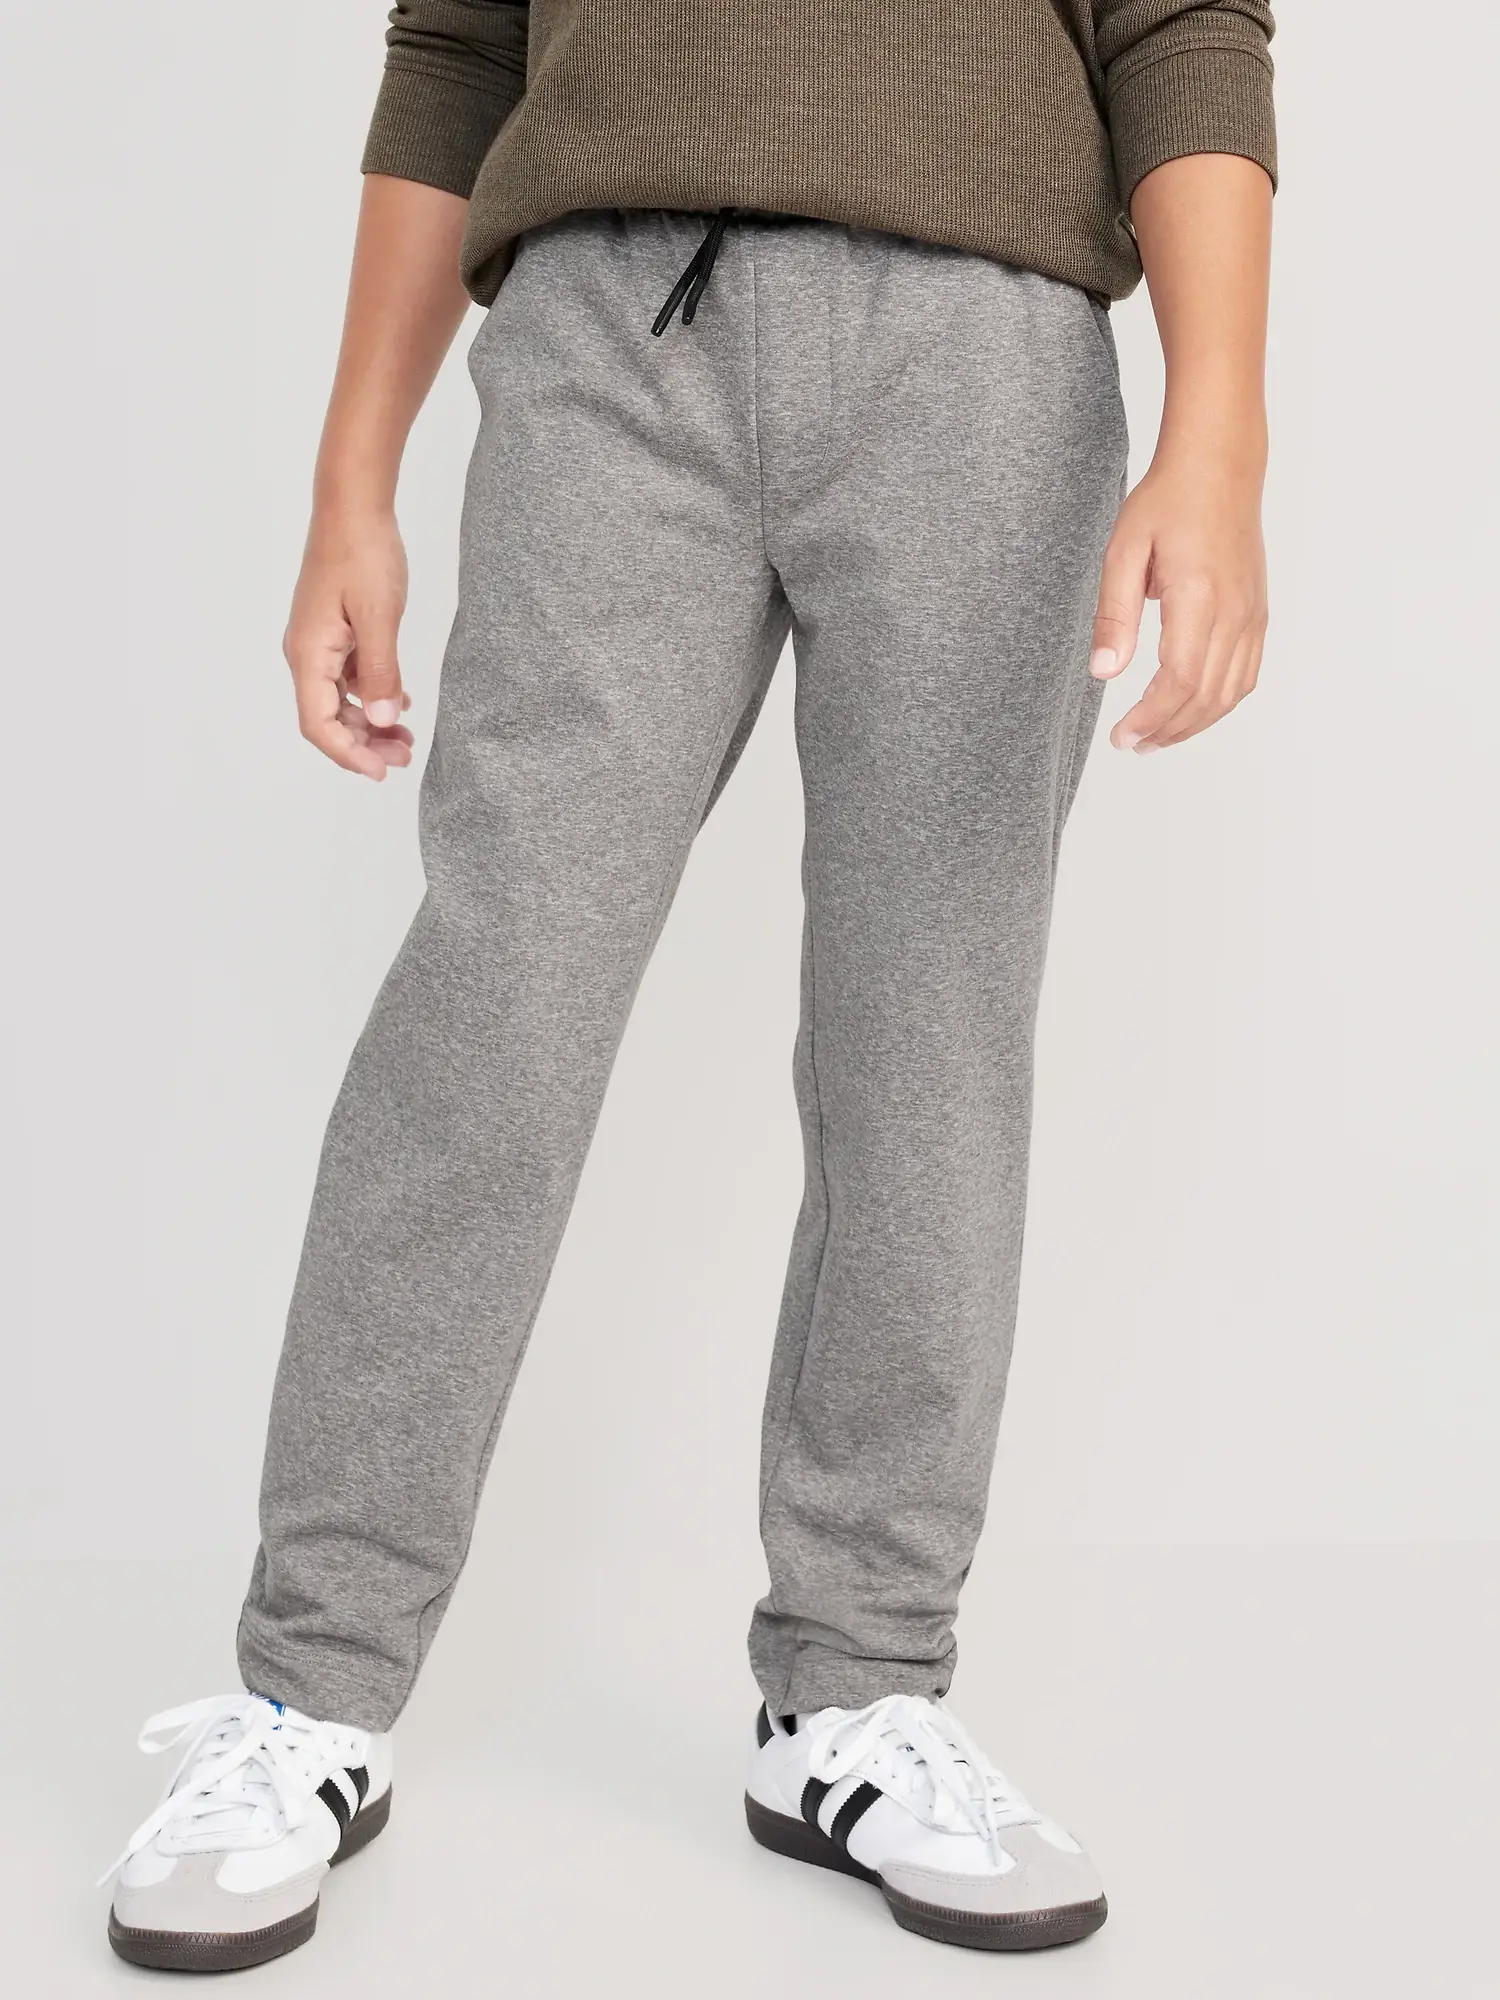 Old Navy CozeCore Tapered Sweatpants for Boys gray. 1